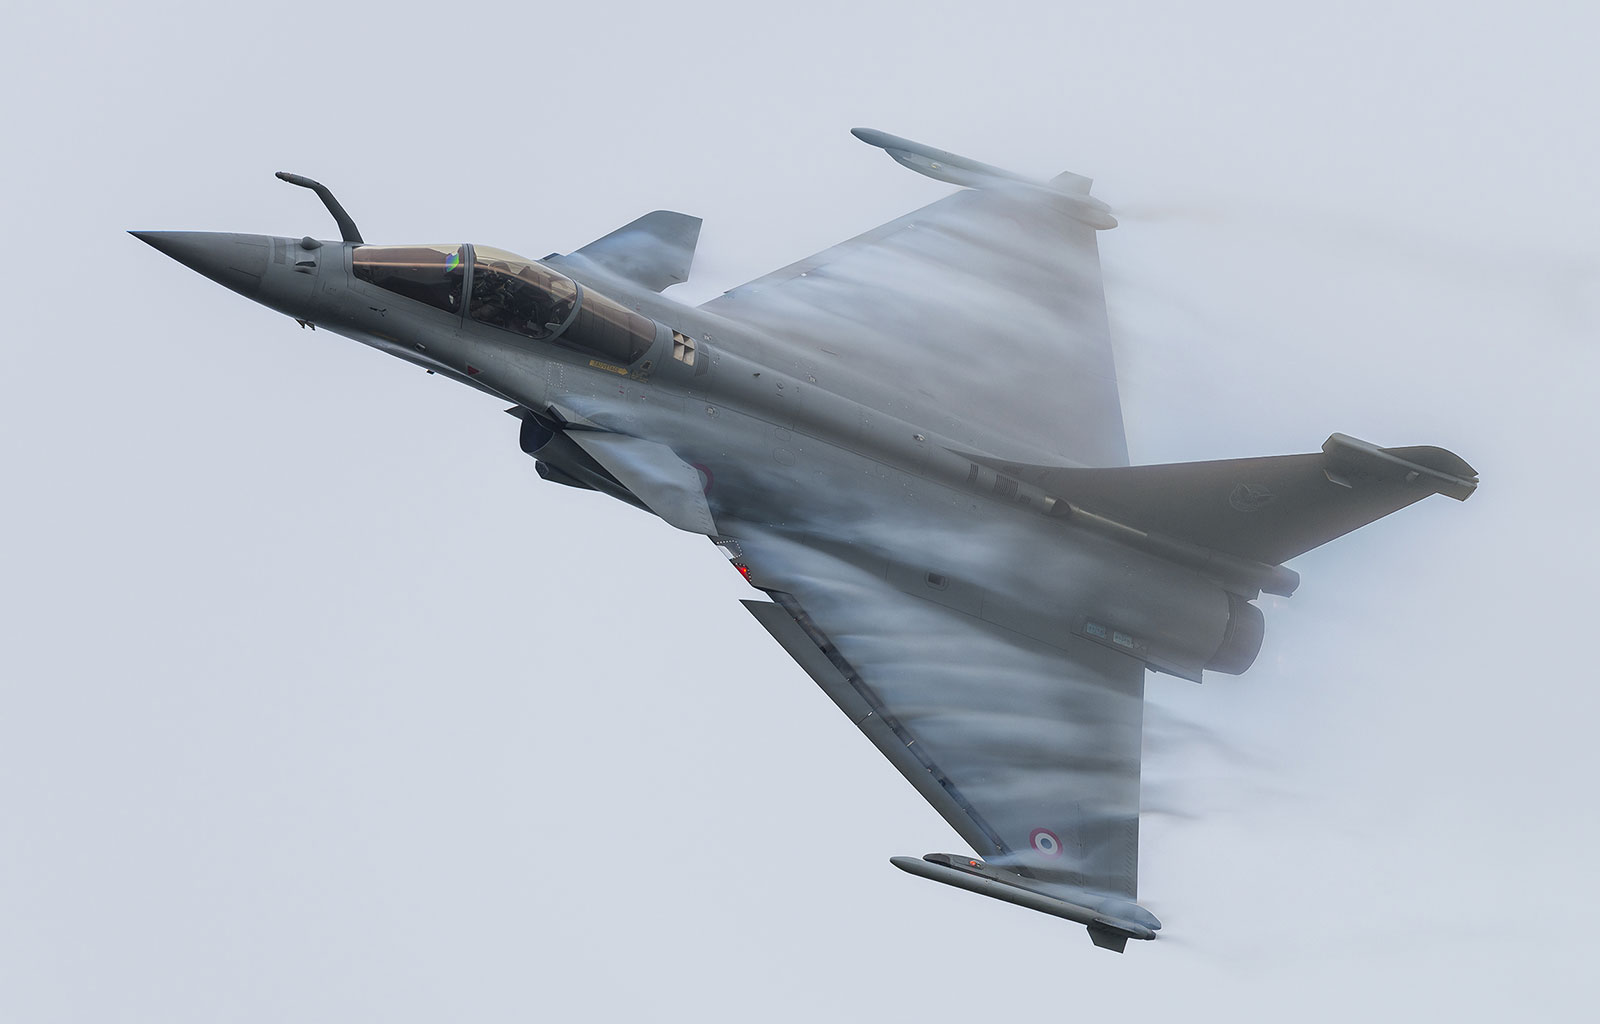 10 Reasons Why The Indian Rafale Is Evolution Itself